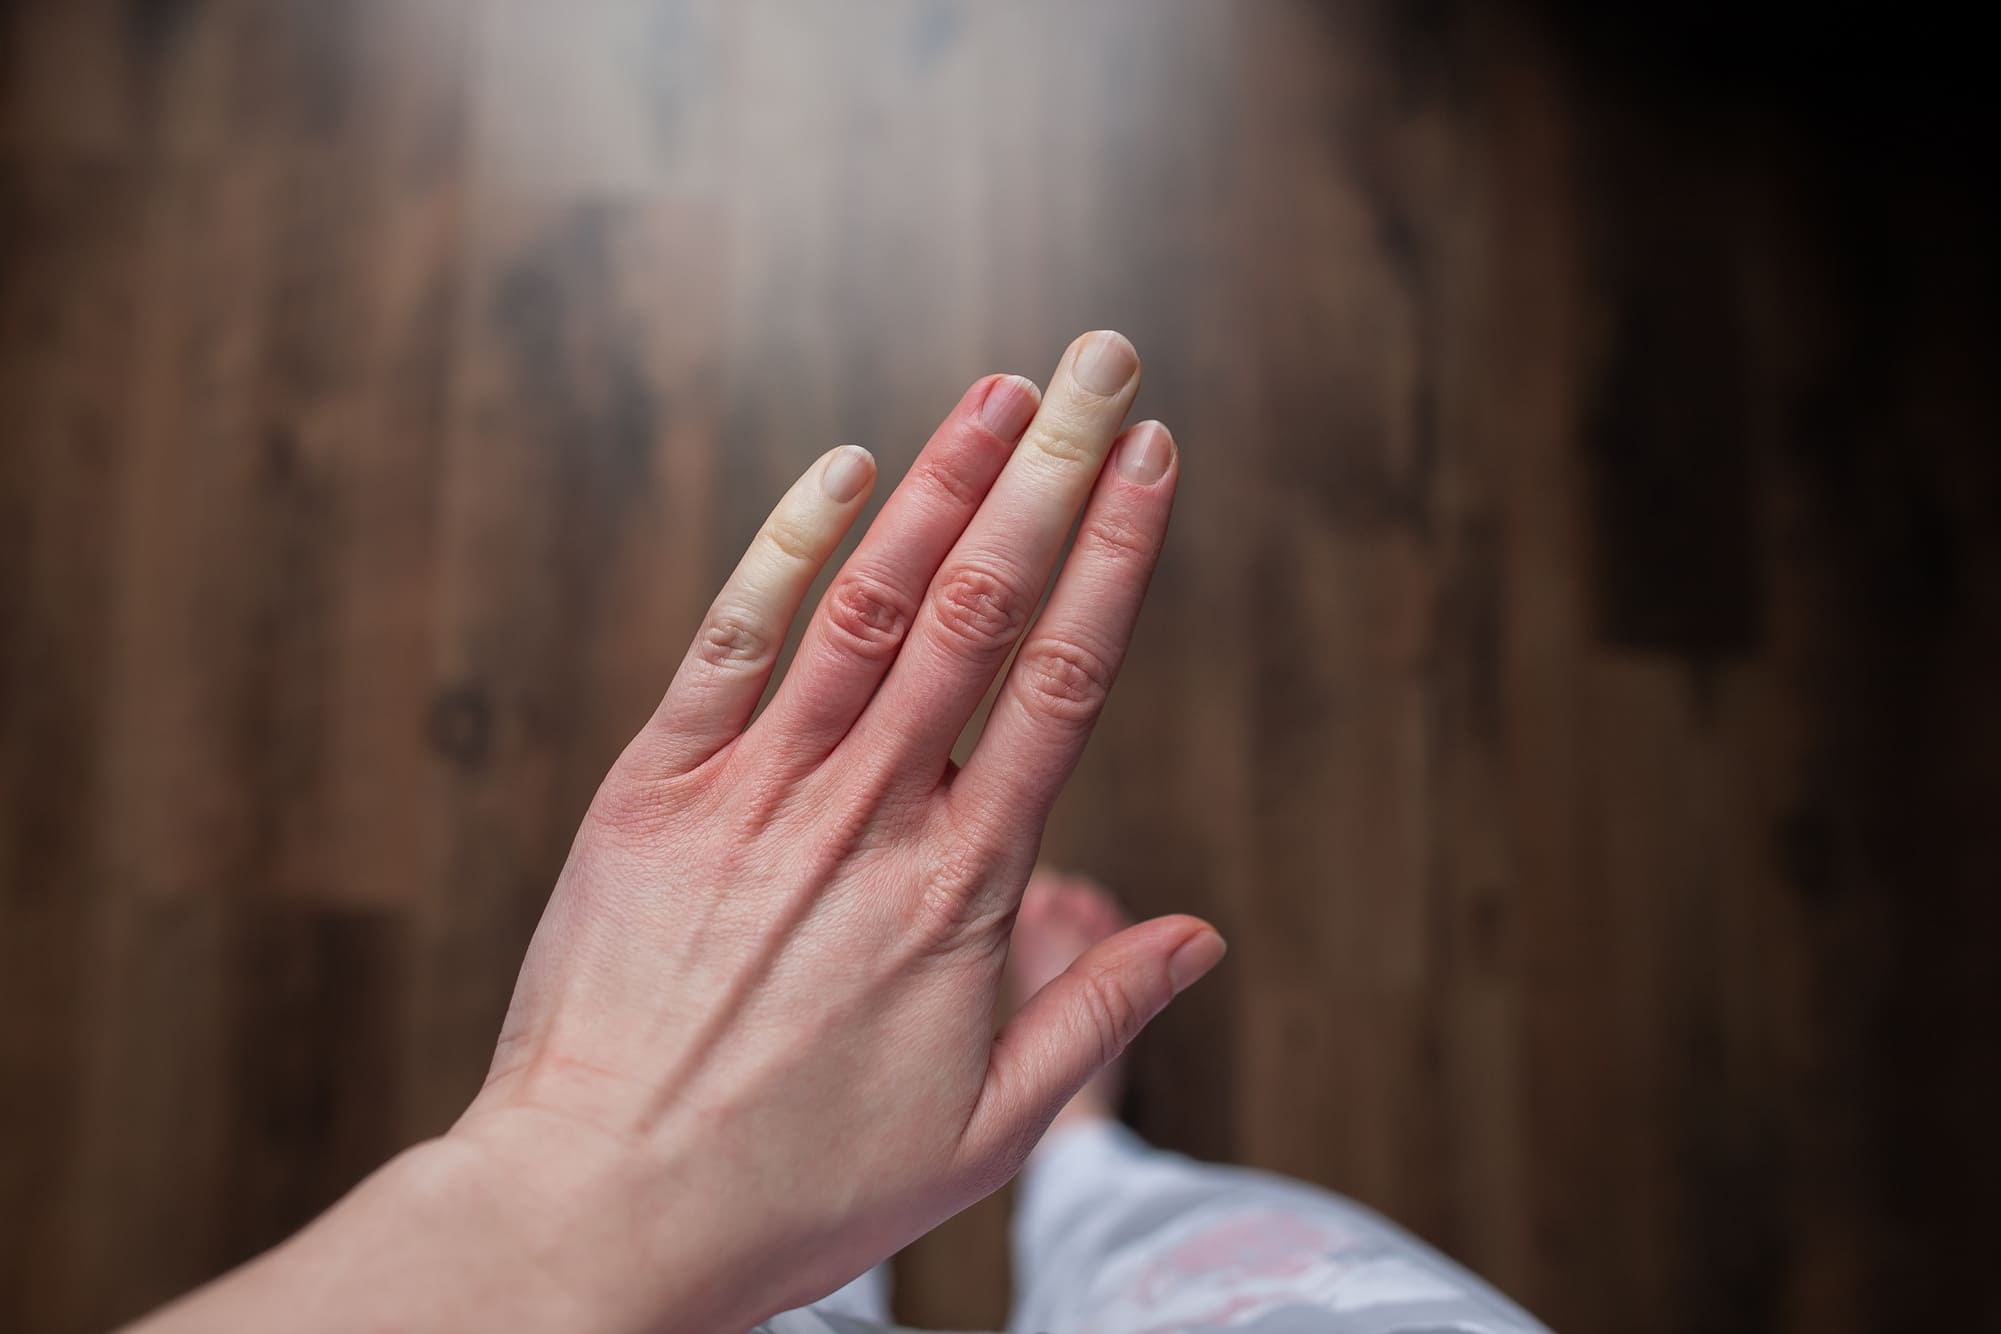 In this article you can learn about nailfold capillaroscopy importance in Raynaud's Phenomenon.